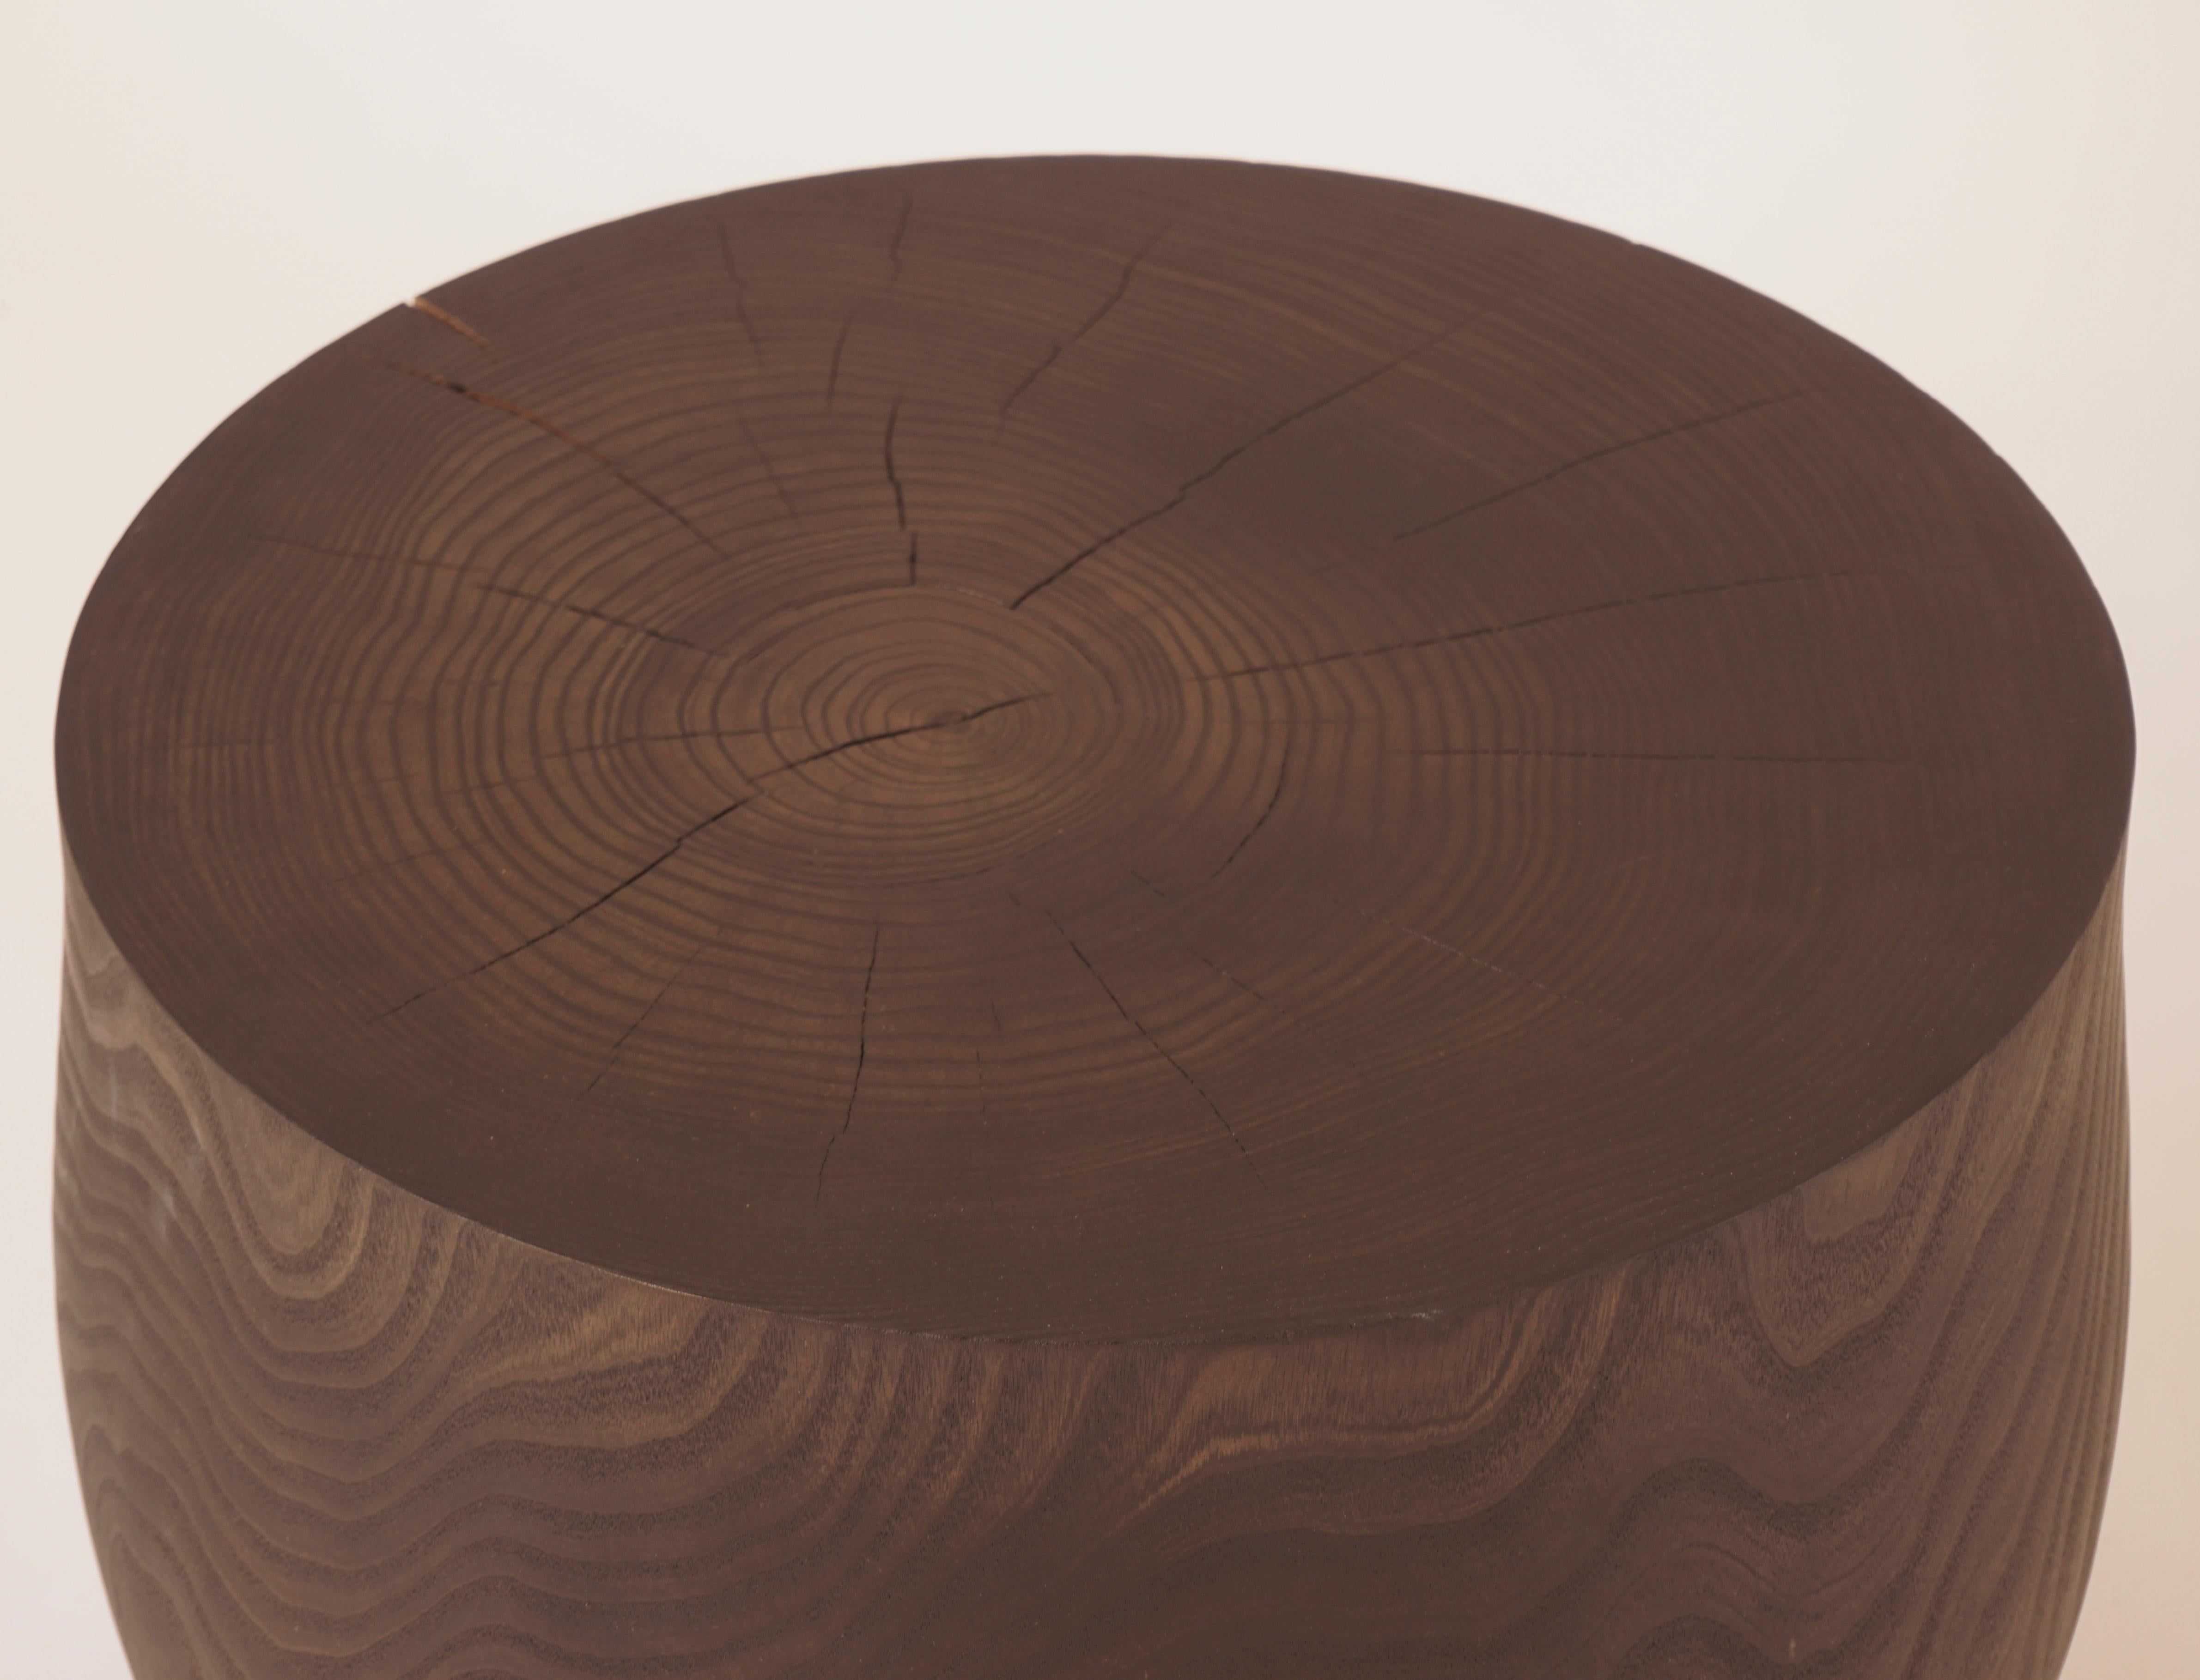 This newest shape was added to Lehrecke's pedestal collection in 2018. The piece was turned on a custom built lathe, set to dry for three months and then ebonised and given an oil waxed finish. Catalpa is fast growing and locally sourced wood from